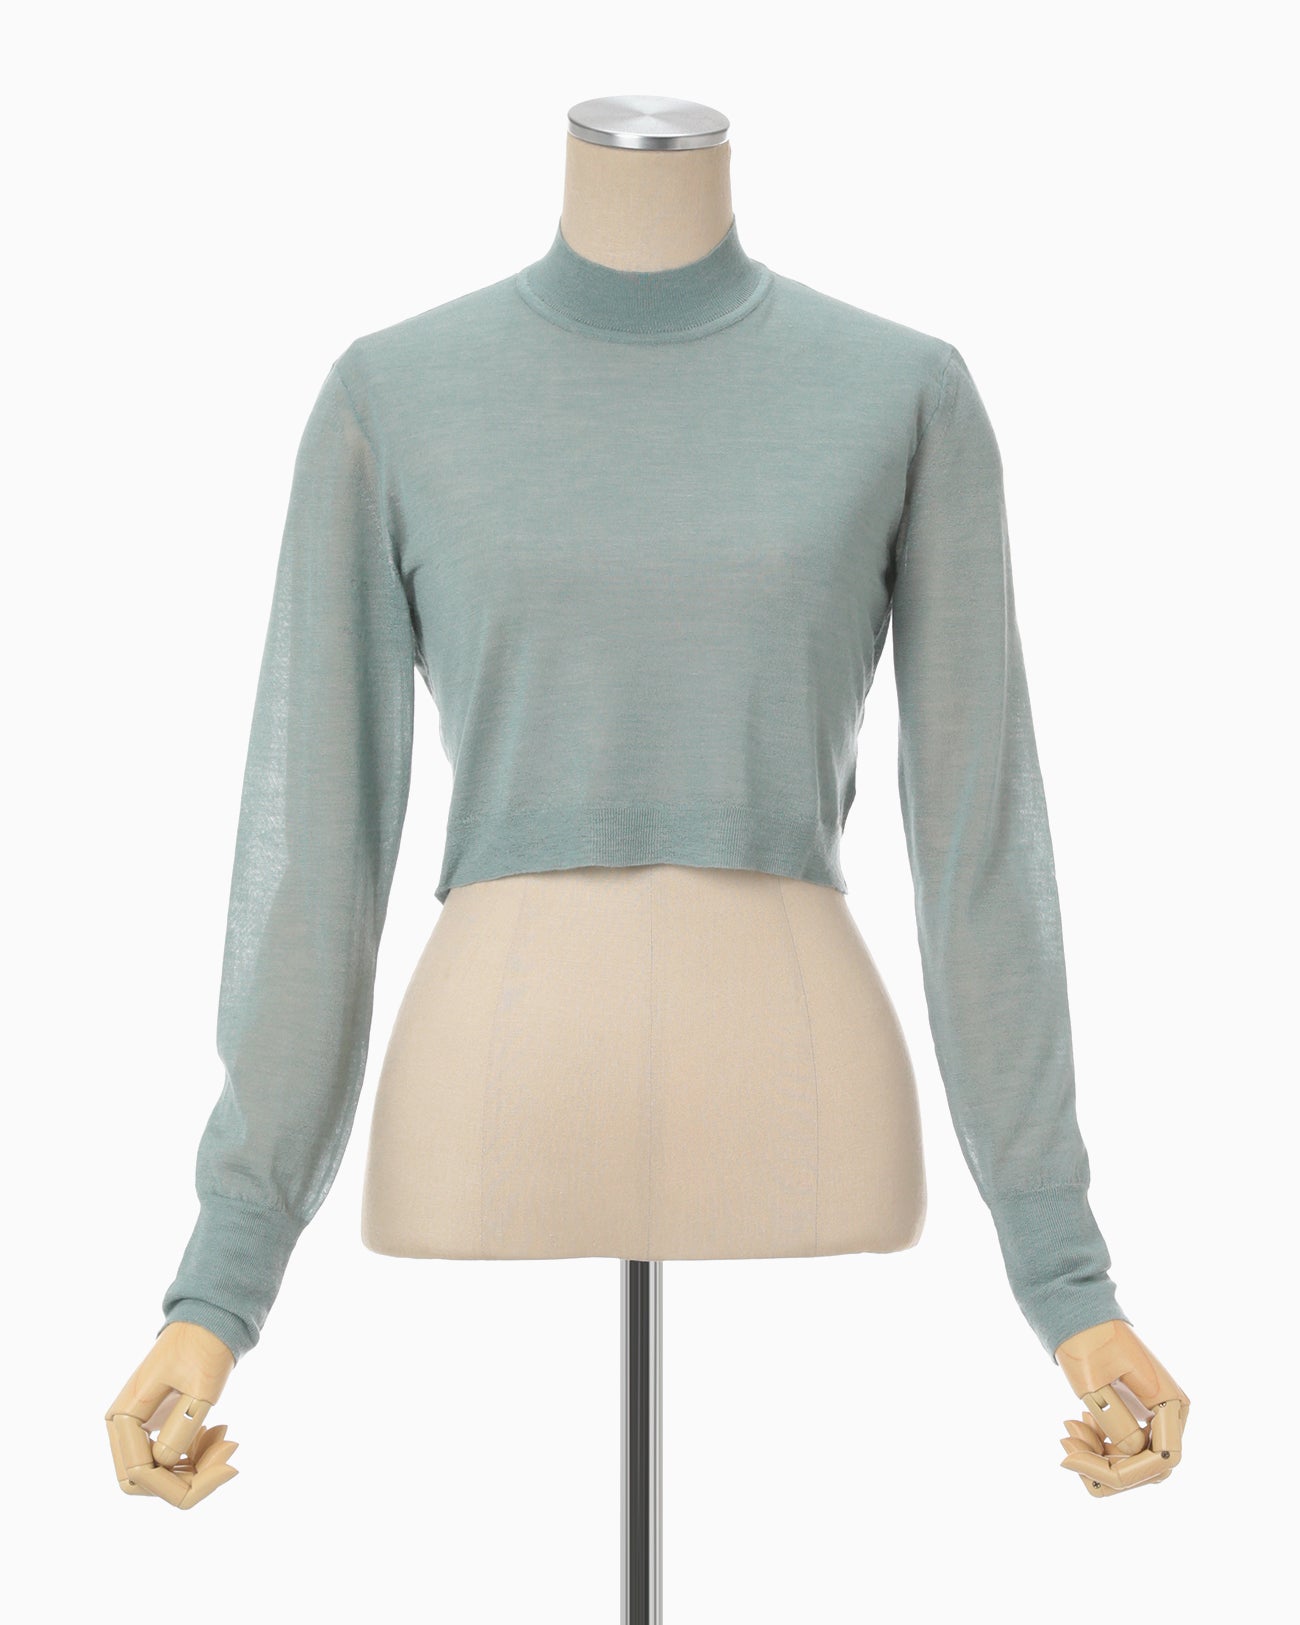 Silk Cashmere Knitted Top - mint green